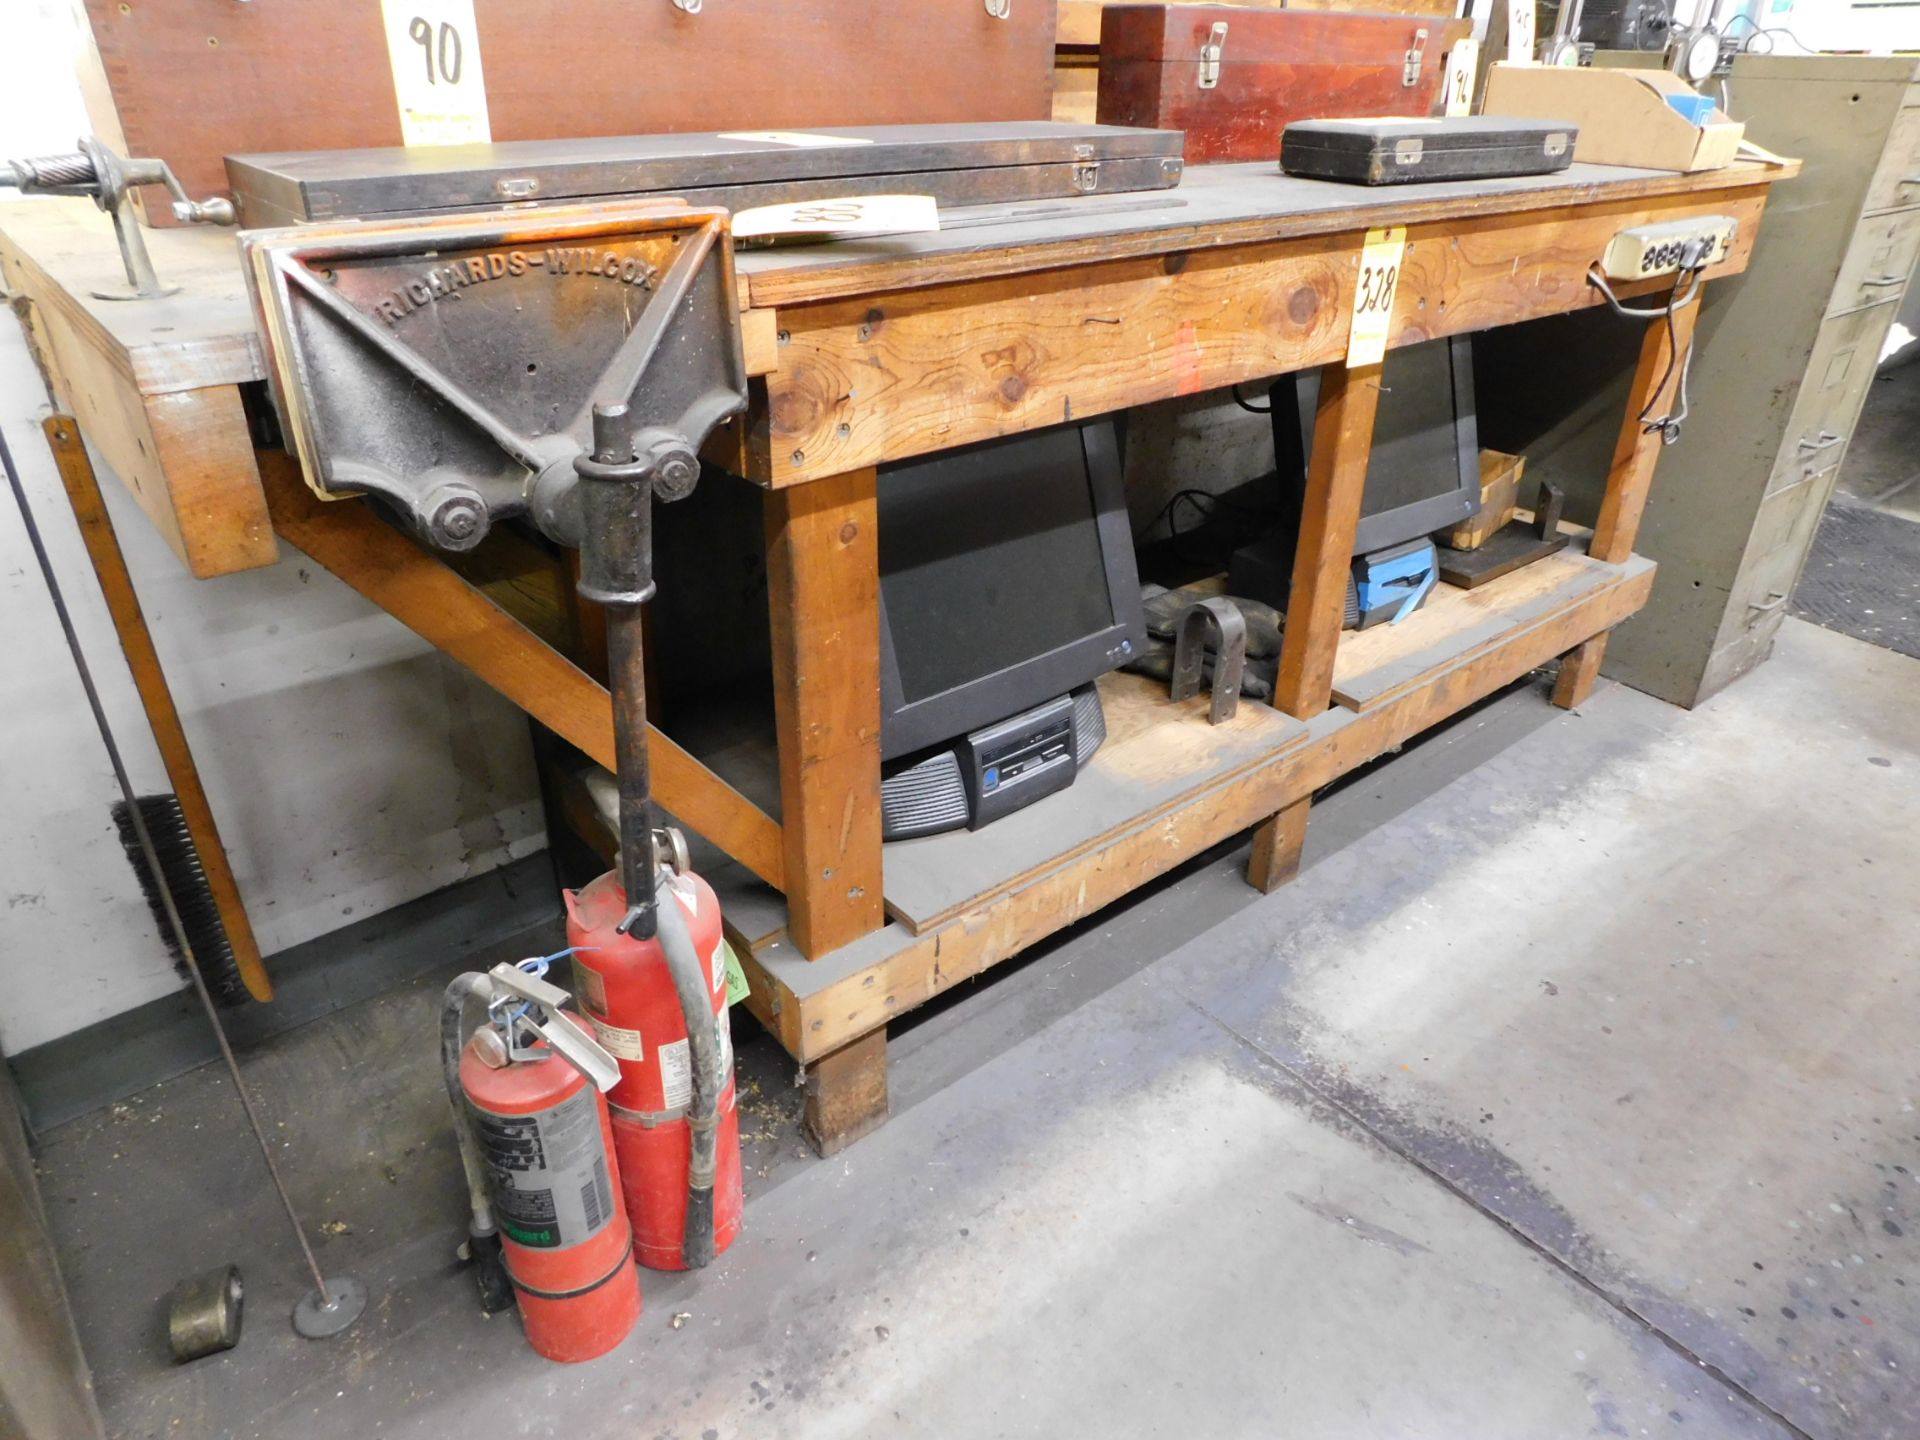 Wooden Workbench with Richards-Wilcox Woodworking Vise